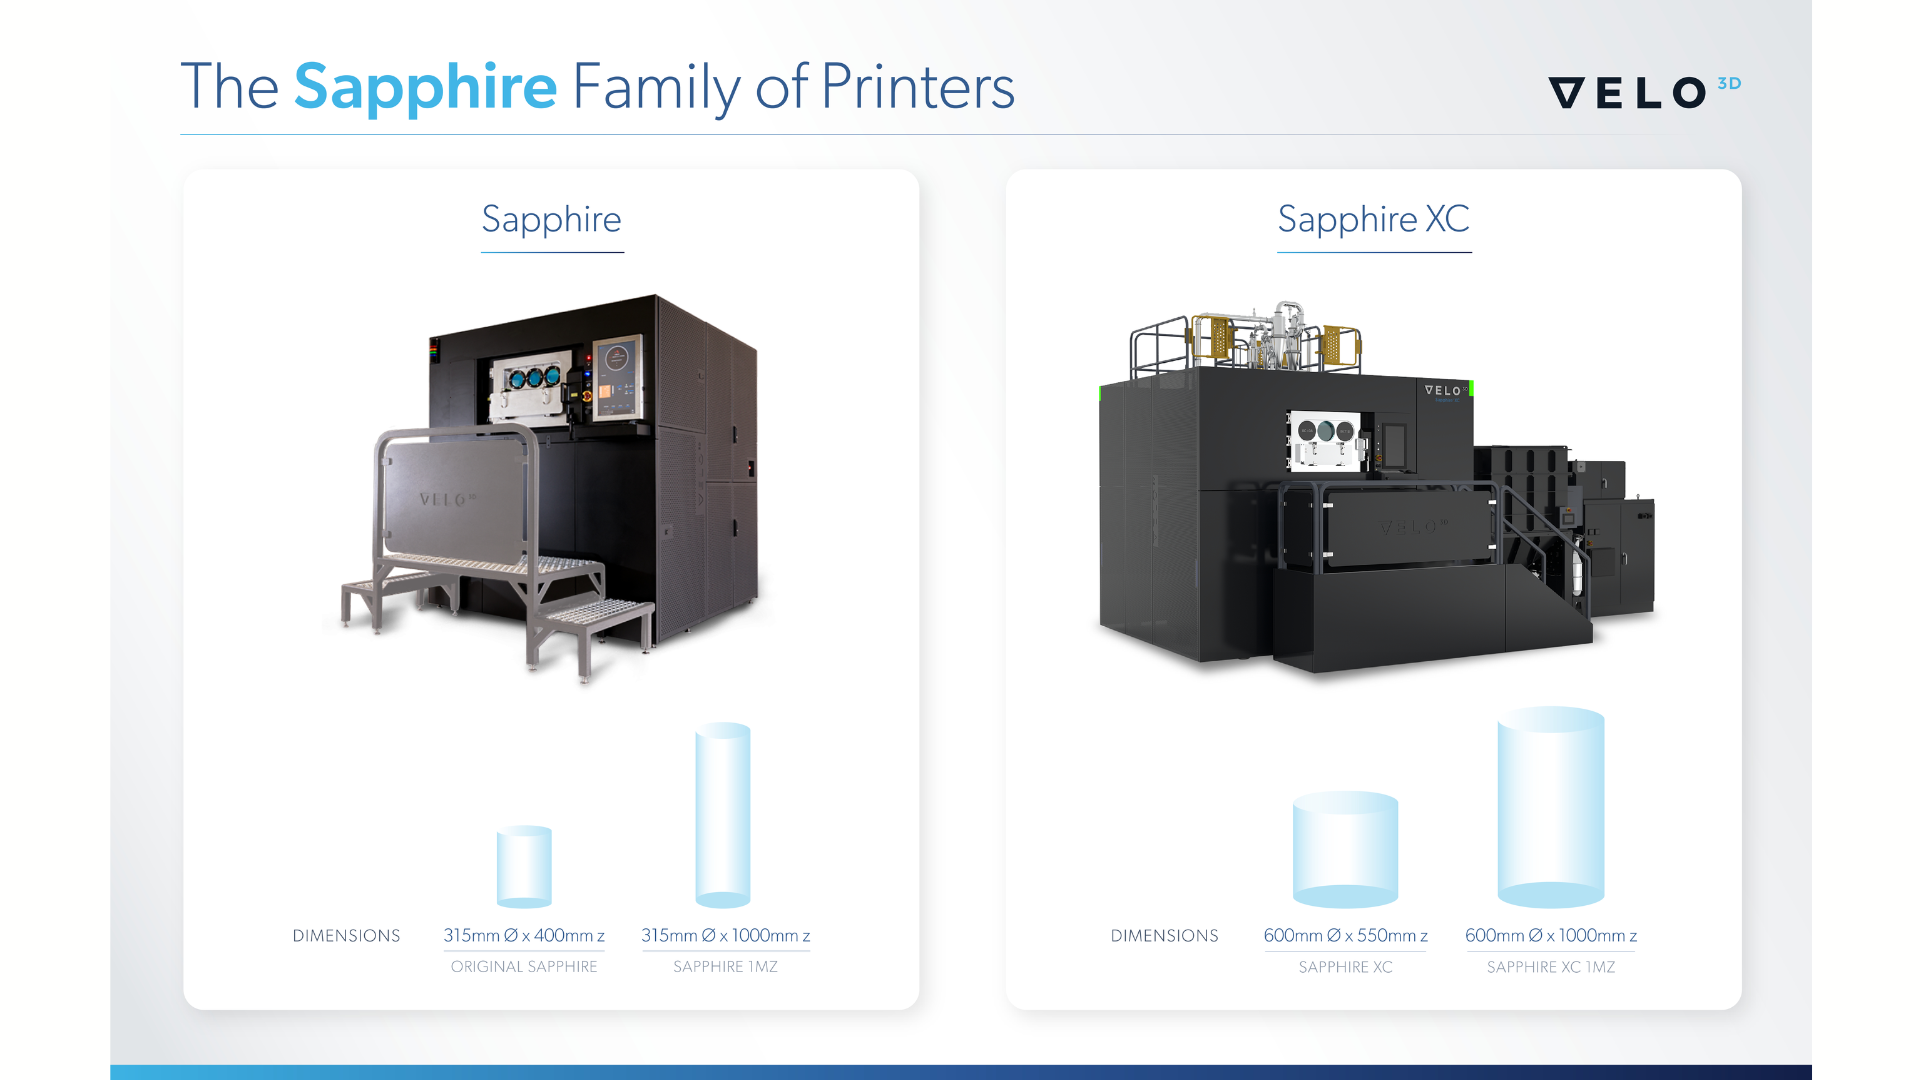 Velo3D’s large-format 3D printer, Sapphire XC 1MZ allows customers to print parts one meter in height acquired in July 2021.